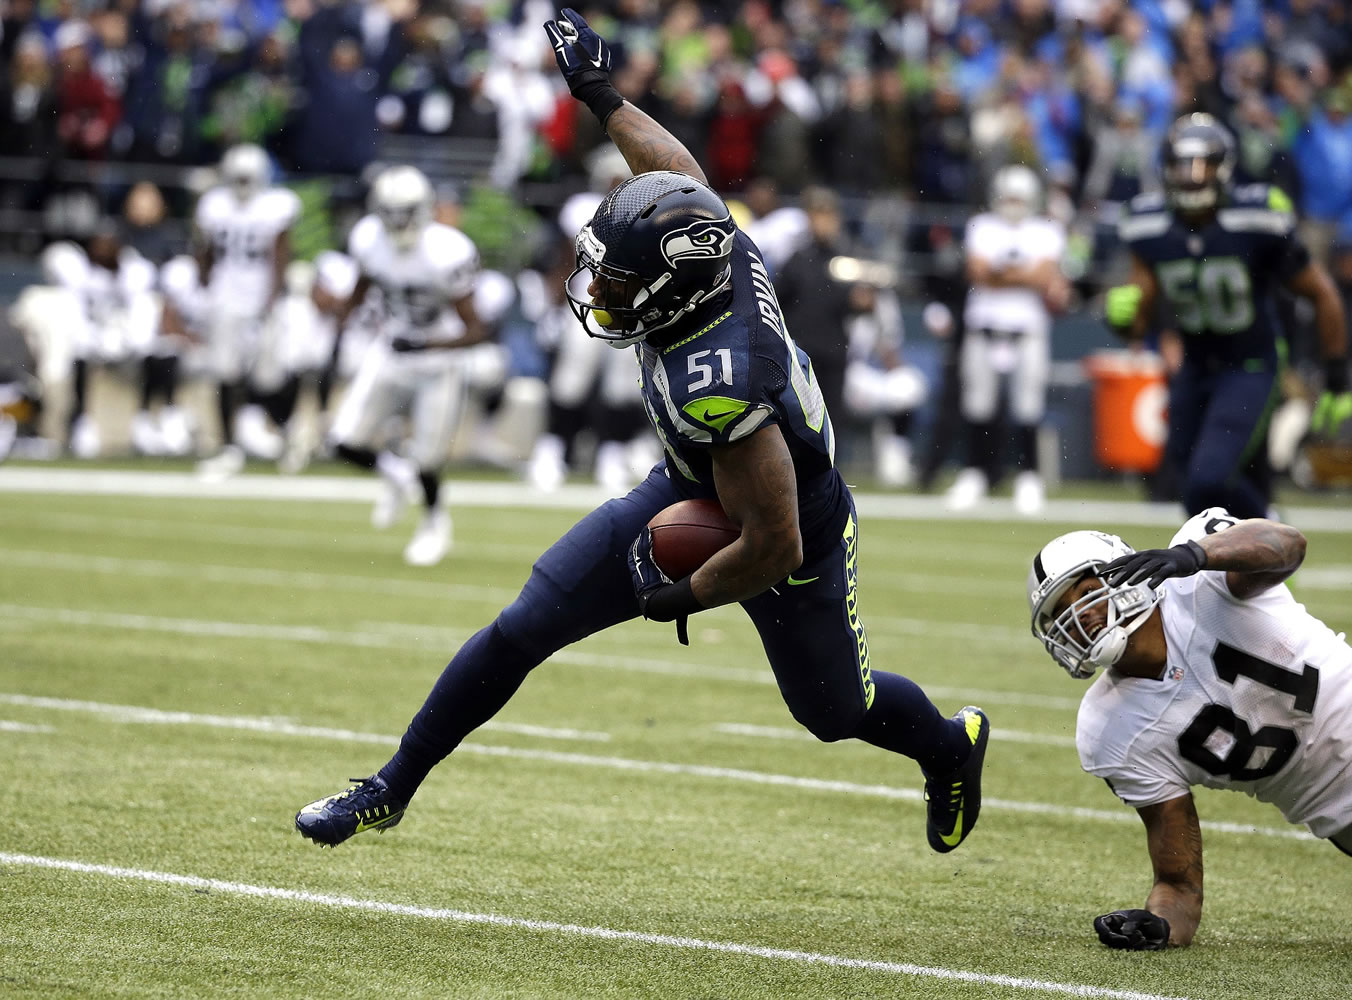 Seattle Seahawks outside linebacker Bruce Irvin (51) runs the ball as Oakland Raiders' Mychal Rivera (81) looks on after Irvin intercepted and ran for a touchdown in the first half of an NFL football game, Sunday, Nov. 2, 2014, in Seattle.